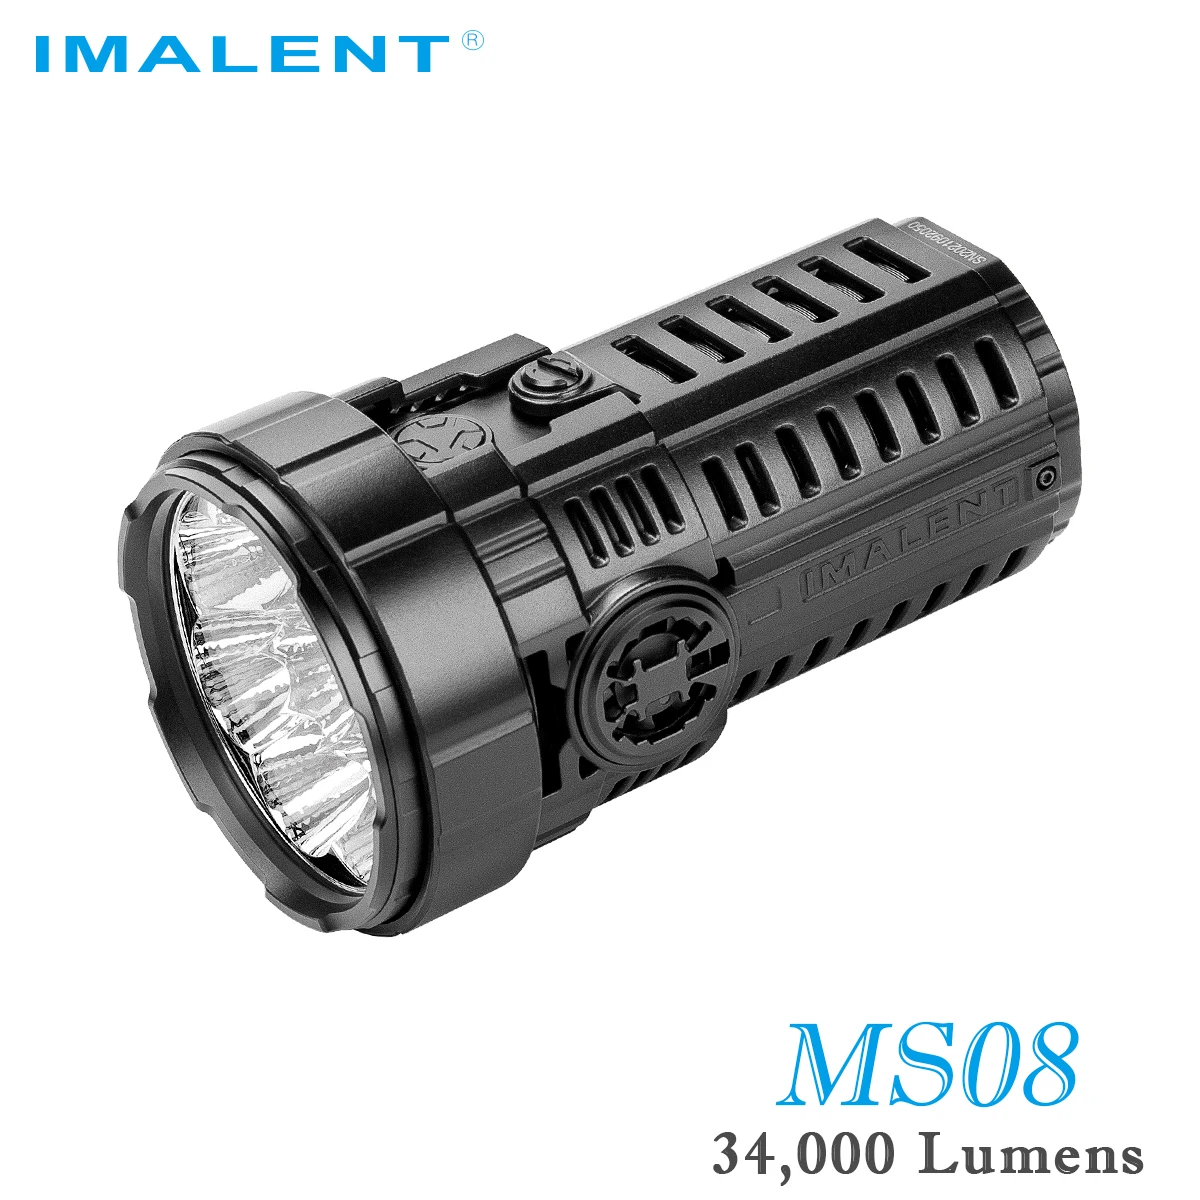 IMALENT MS08 Brightest EDC Flashlight 34000Lumens CREE XHP70 2nd LEDs Professional Rechargeable Lighting Torch Power Never Hot